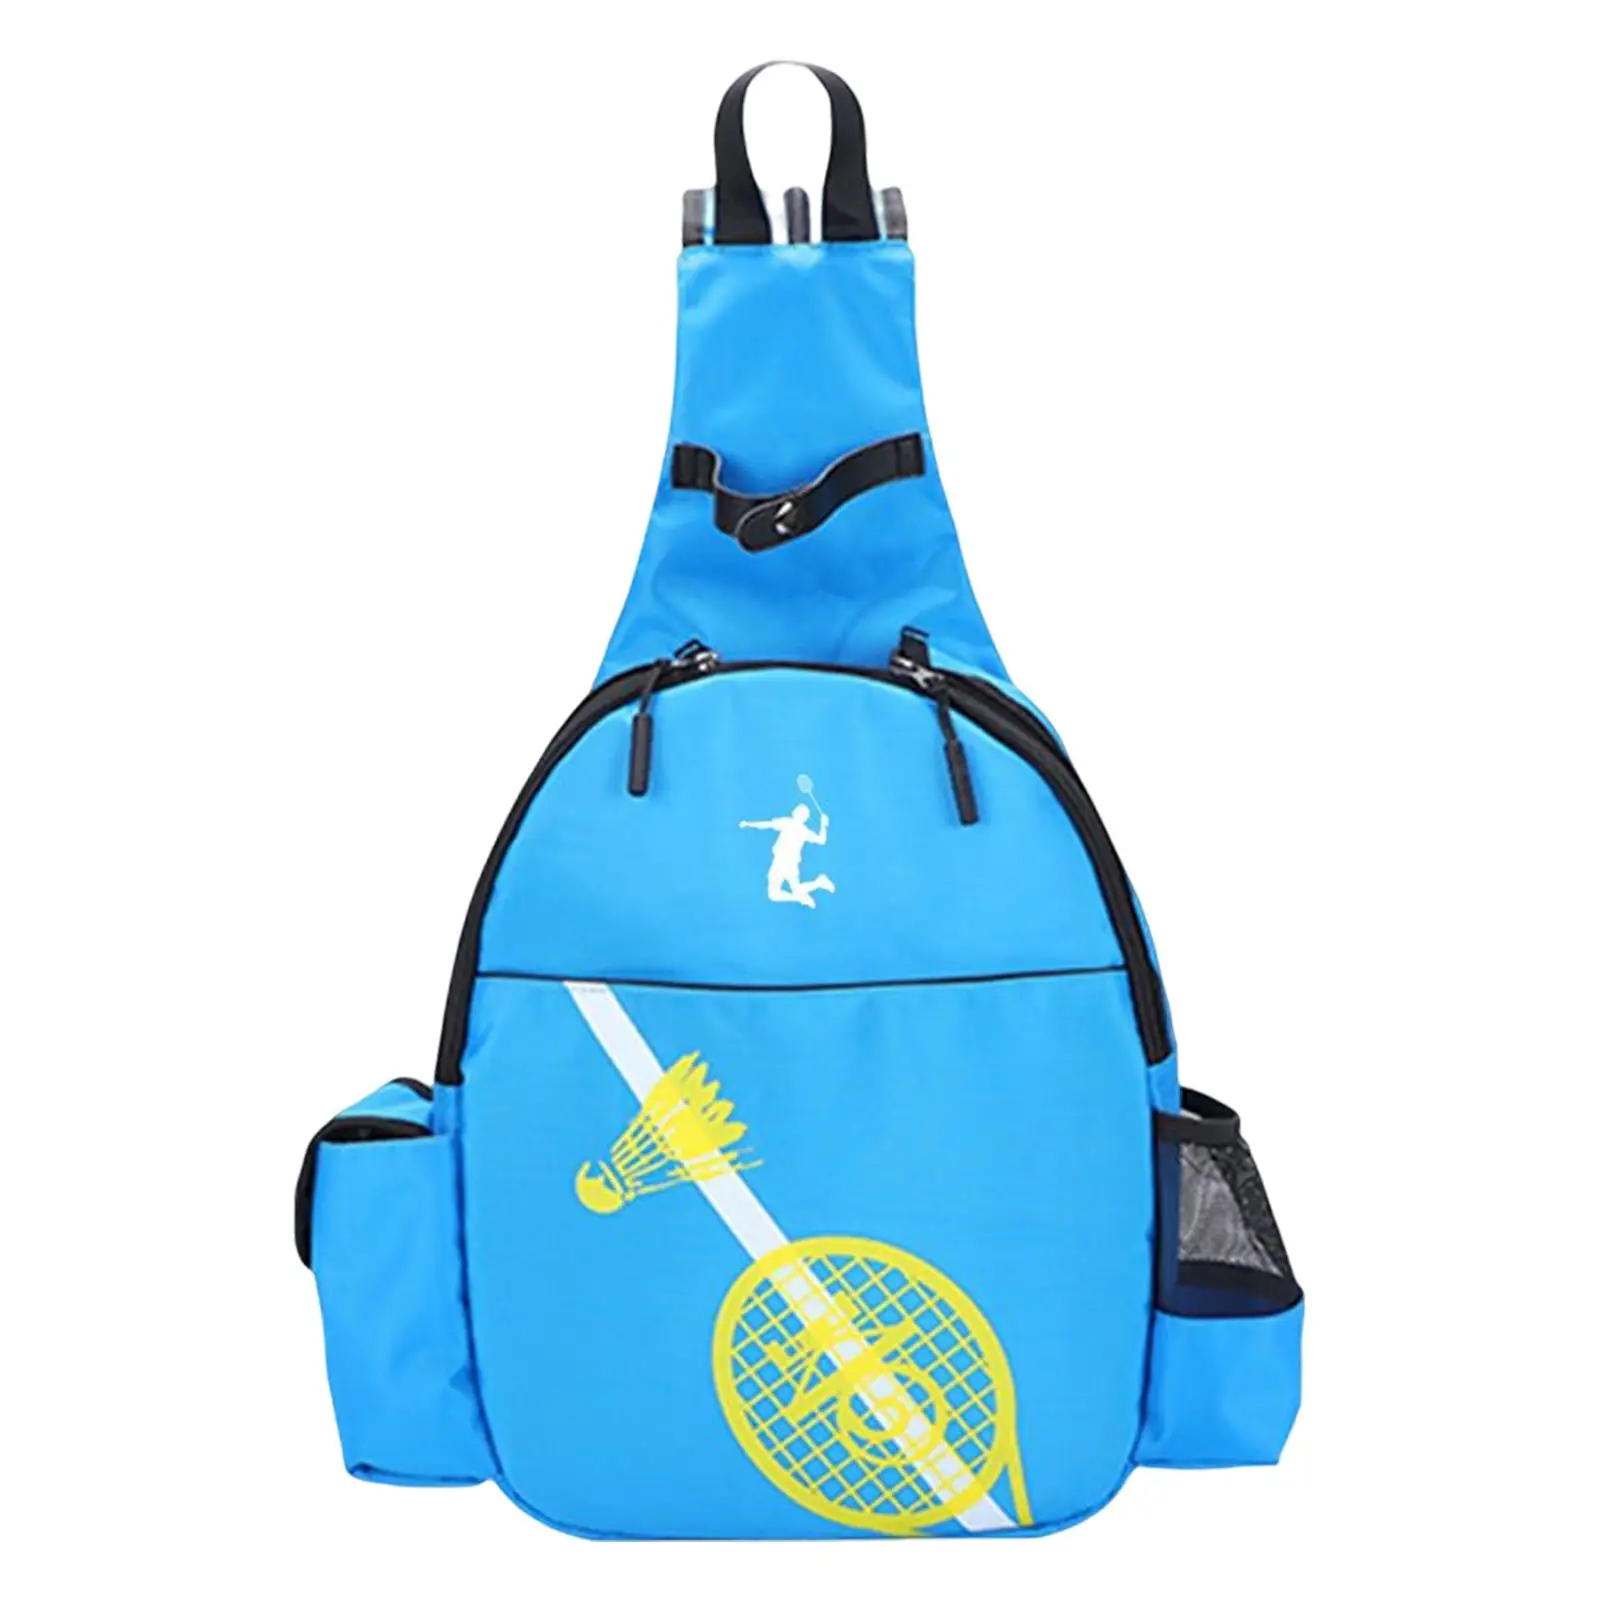 Tennis Racket Backpack Large Capacity Lightweight for Travel Youth Adults